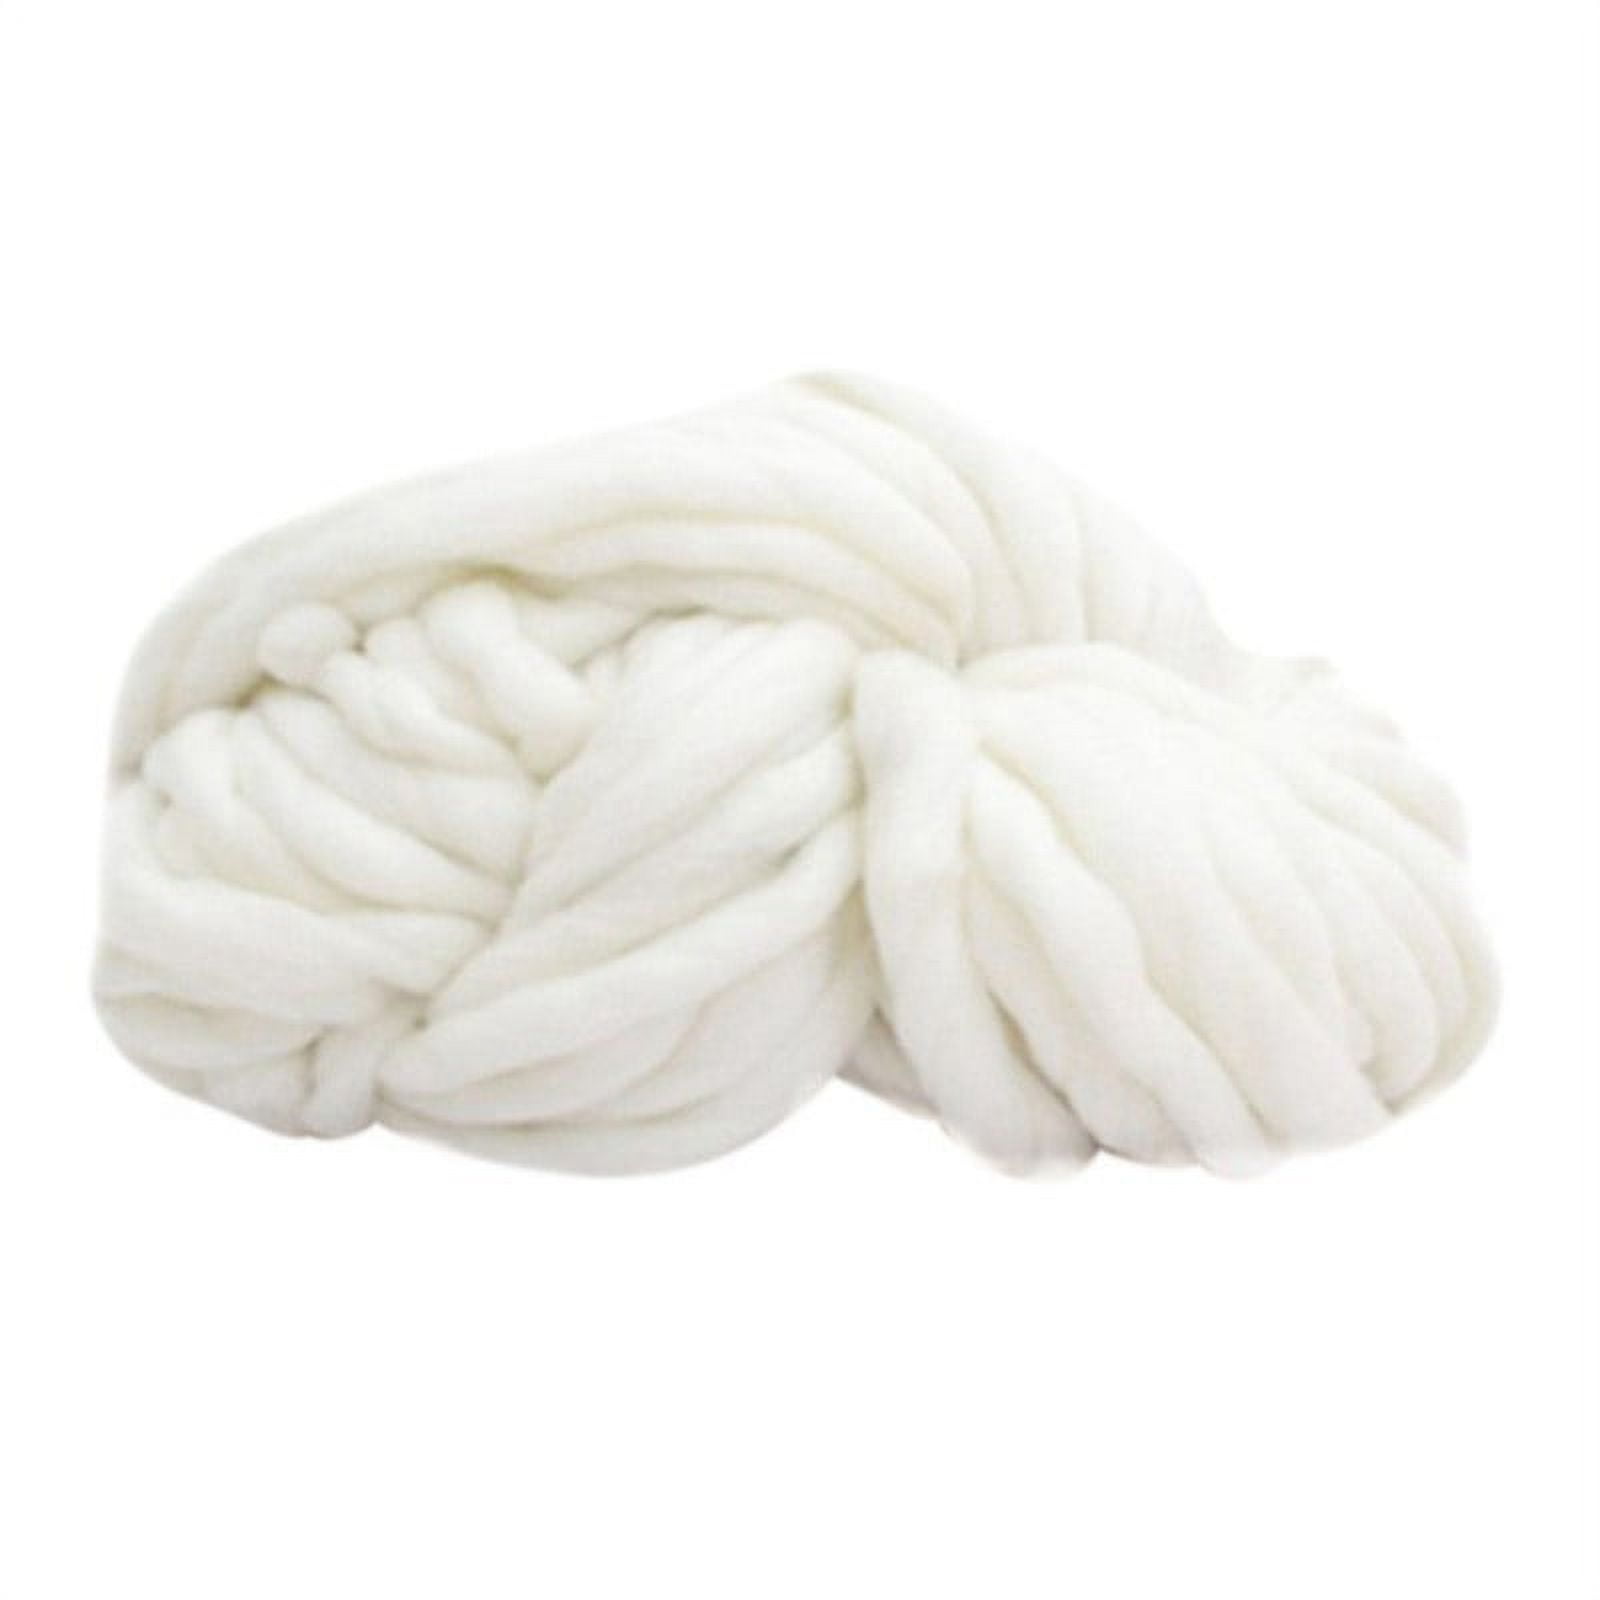 3 Pack Beginners Crochet Yarn, Off White Yarn for Crocheting Knitting  Beginners, Easy-to-See Stitches, Chunky Thick Bulky Cotton Soft Yarn for